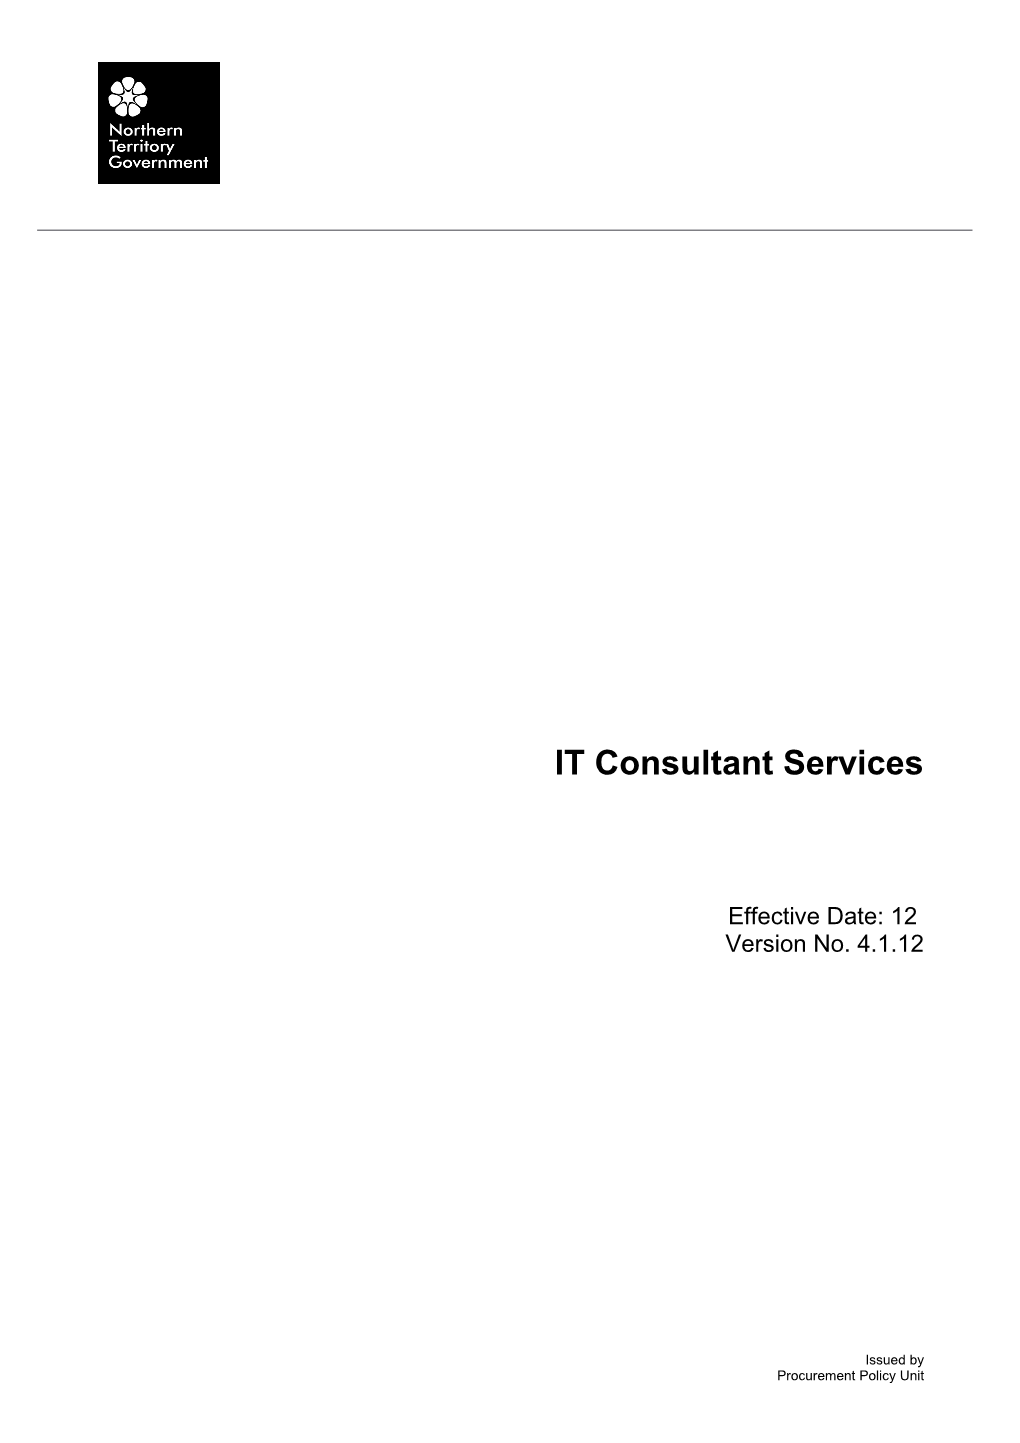 IT Consultant Services - V 4.1.12 (12 December 2008)